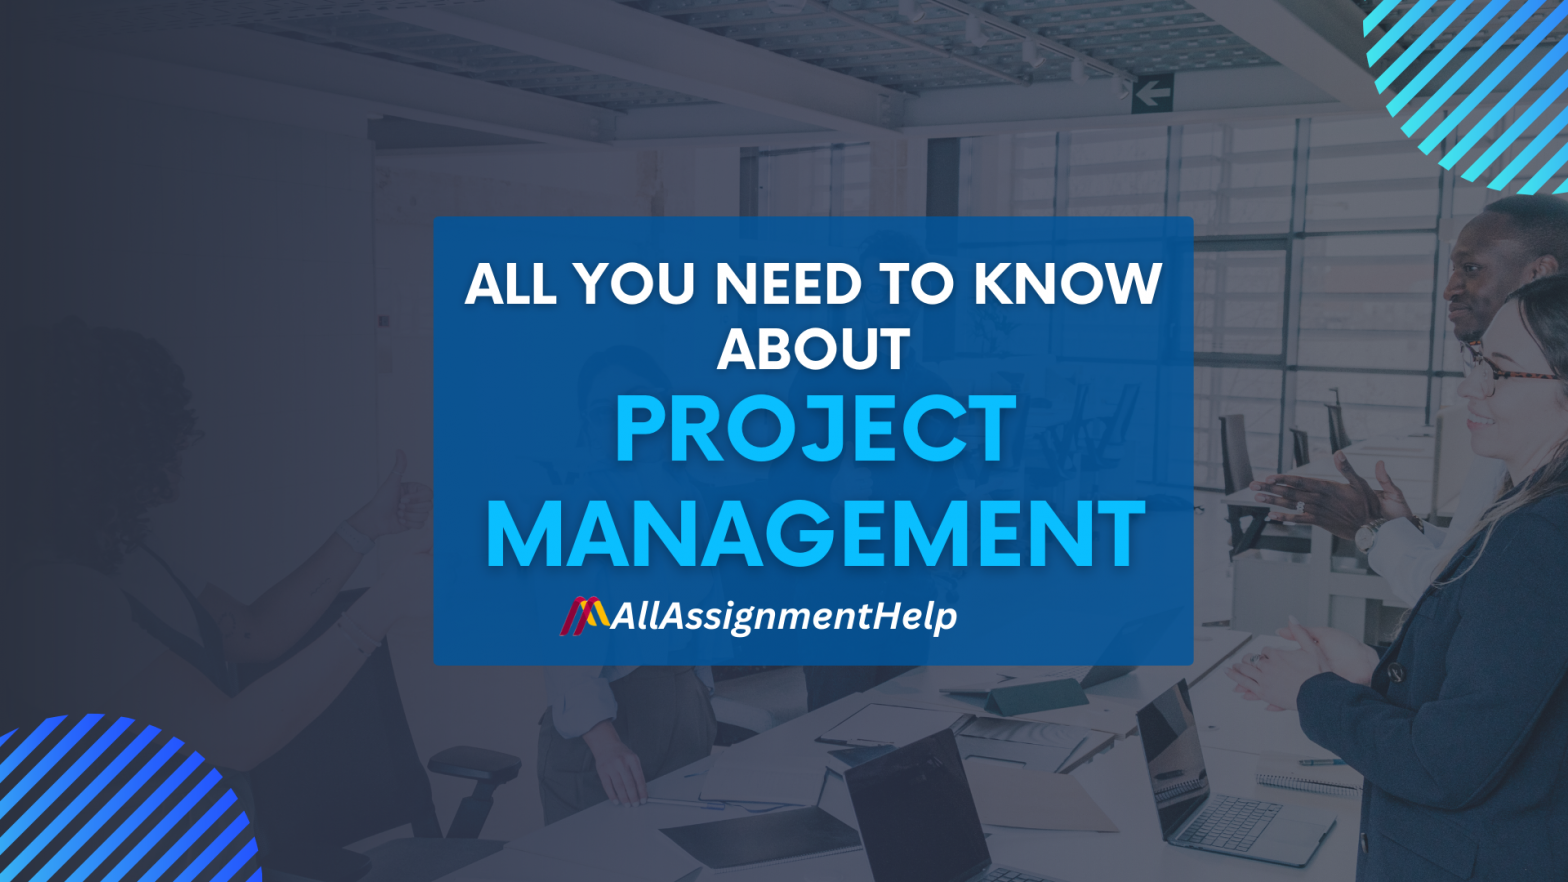 project-management-assignment-help